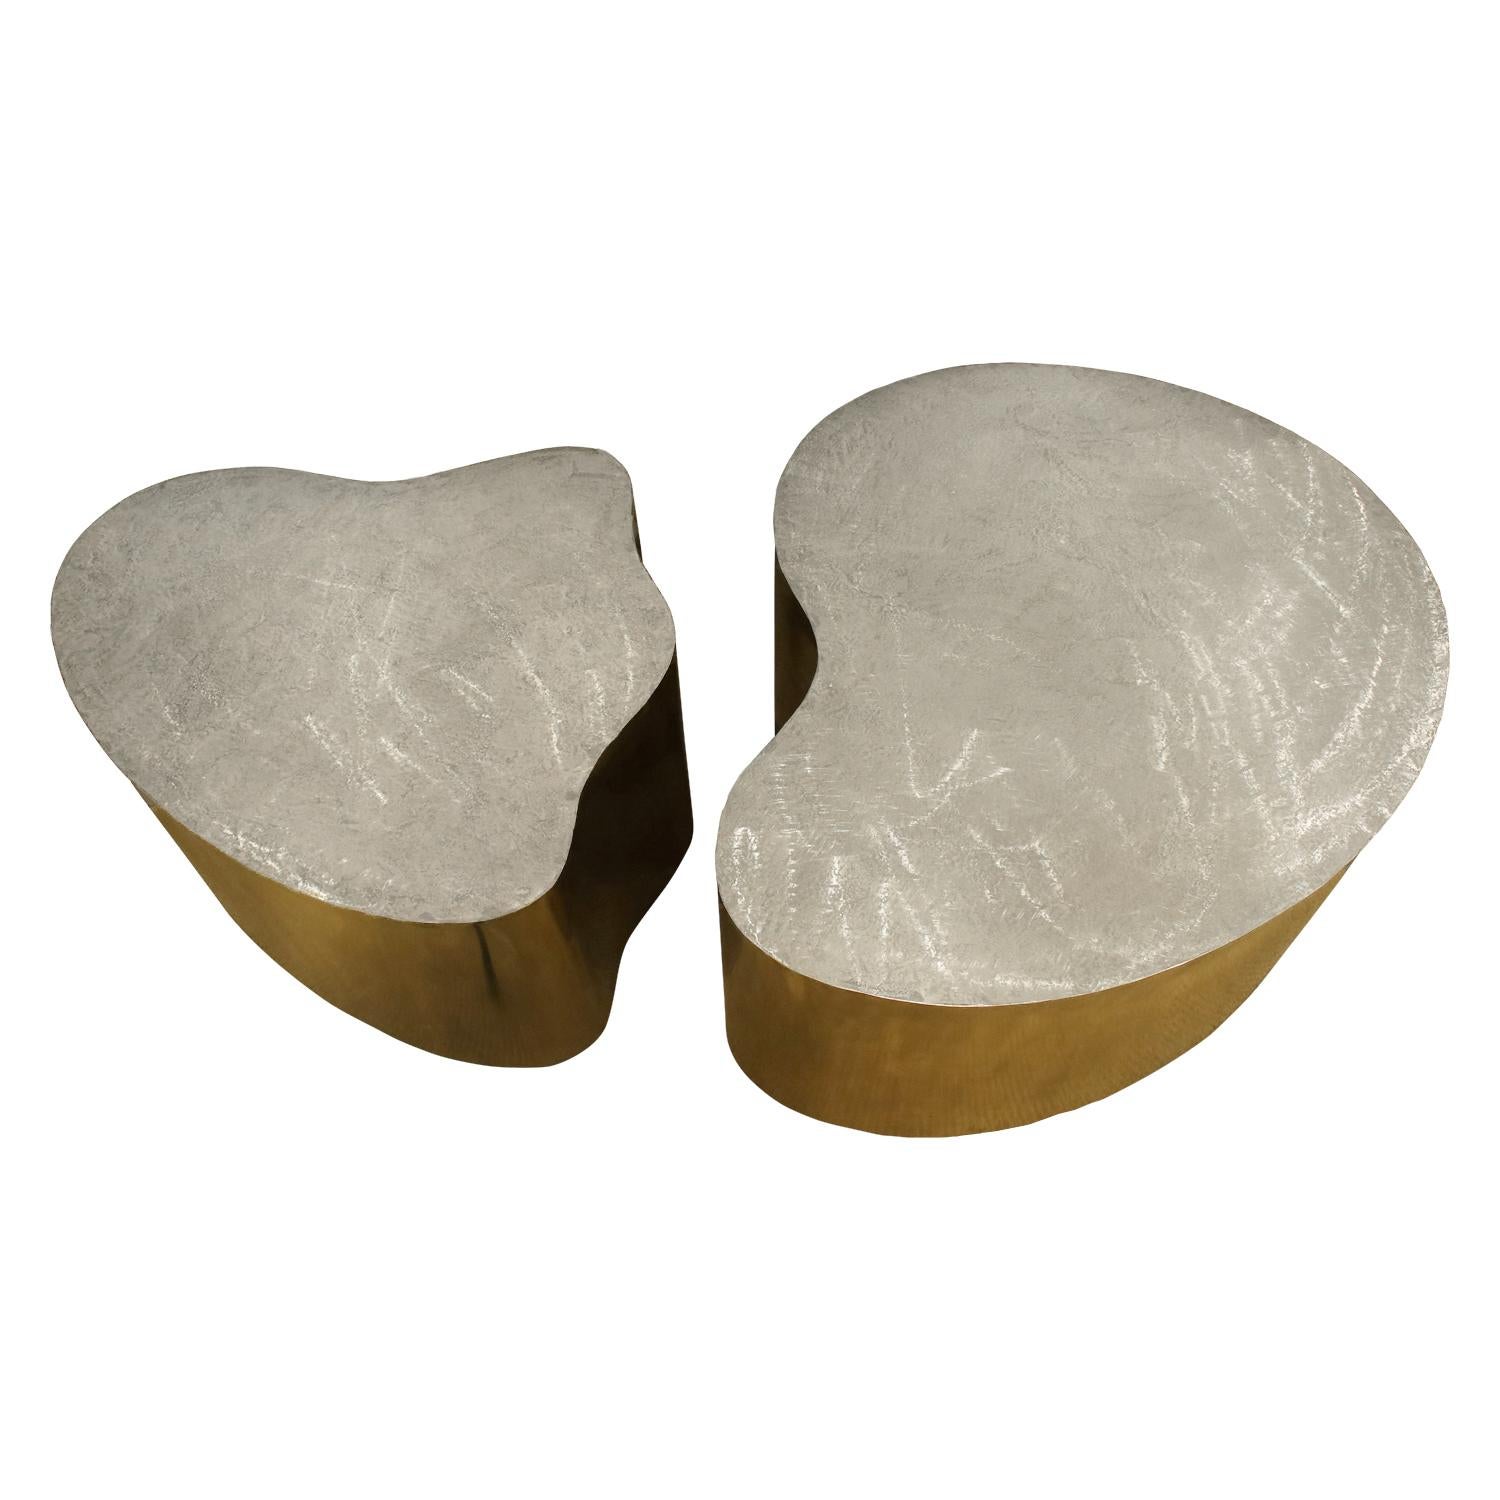 Pair of organic free form coffee tables, bases in patinated brass with tops in brushed steel on hidden castors by Silas Seandel, American 1980s (signed on top “Silas Seandel”). These tables are super chic and the combination of metals is beautiful. 